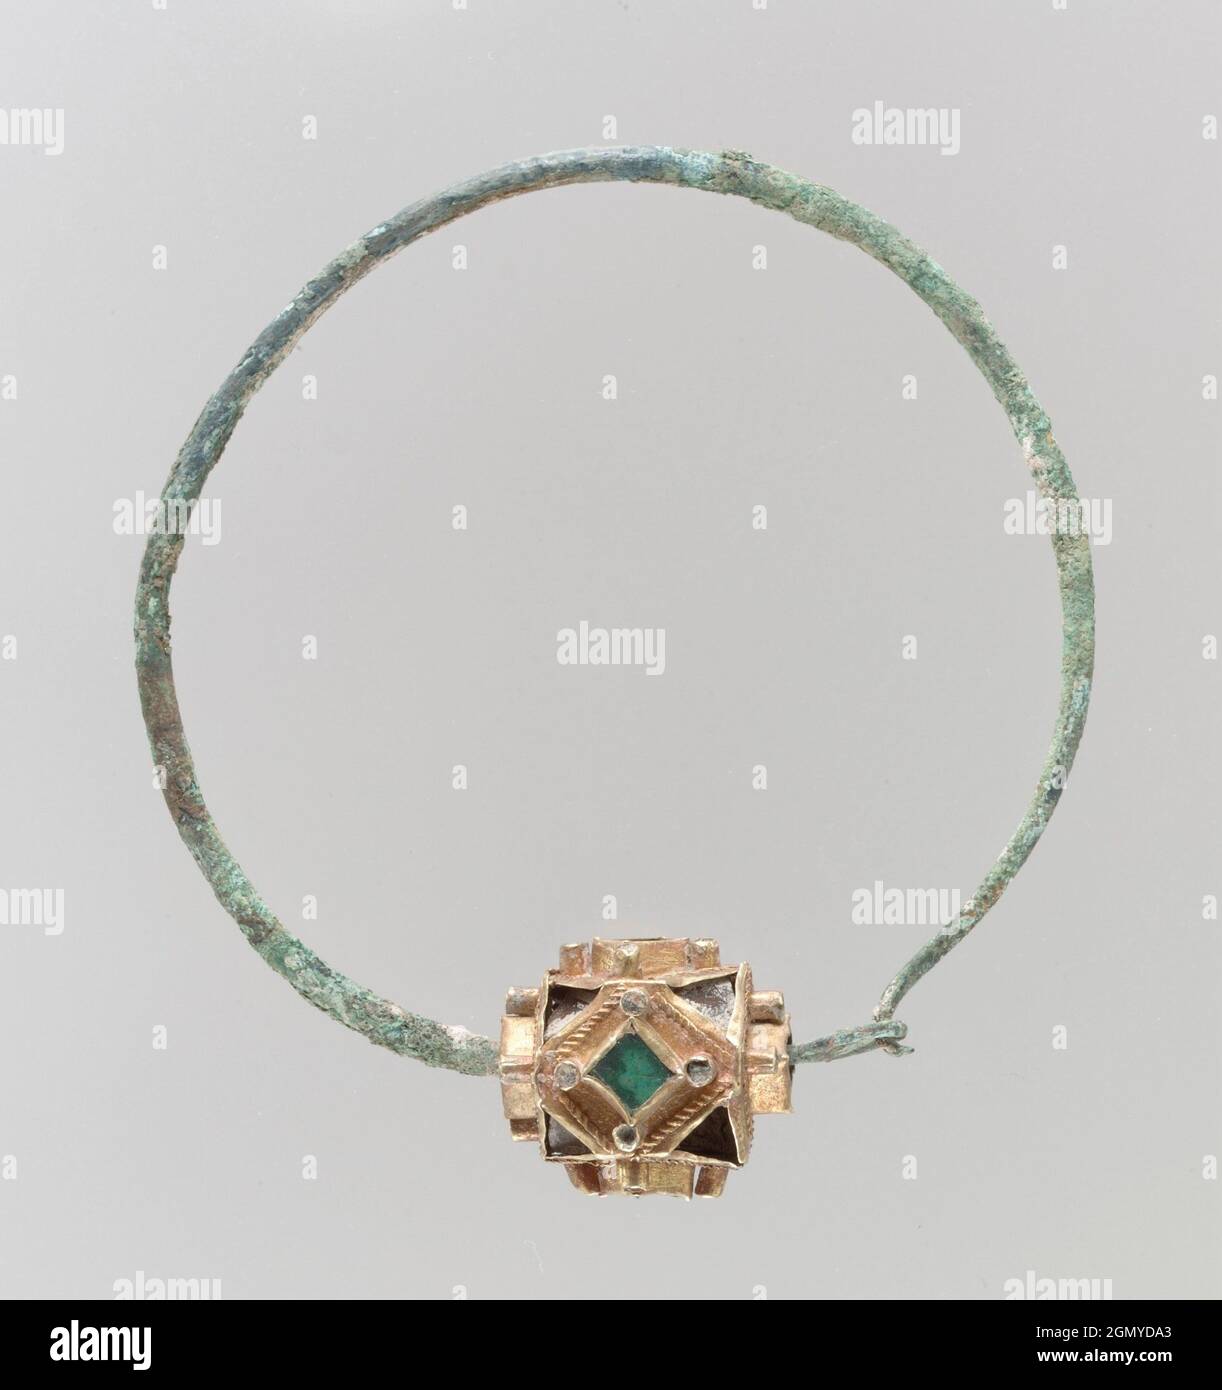 Earring. Date: 6th-7th century; Culture: Frankish; Medium: Gold, green and clear glass, pearls(?); hoop copper alloy or base silver; Dimensions: Stock Photo